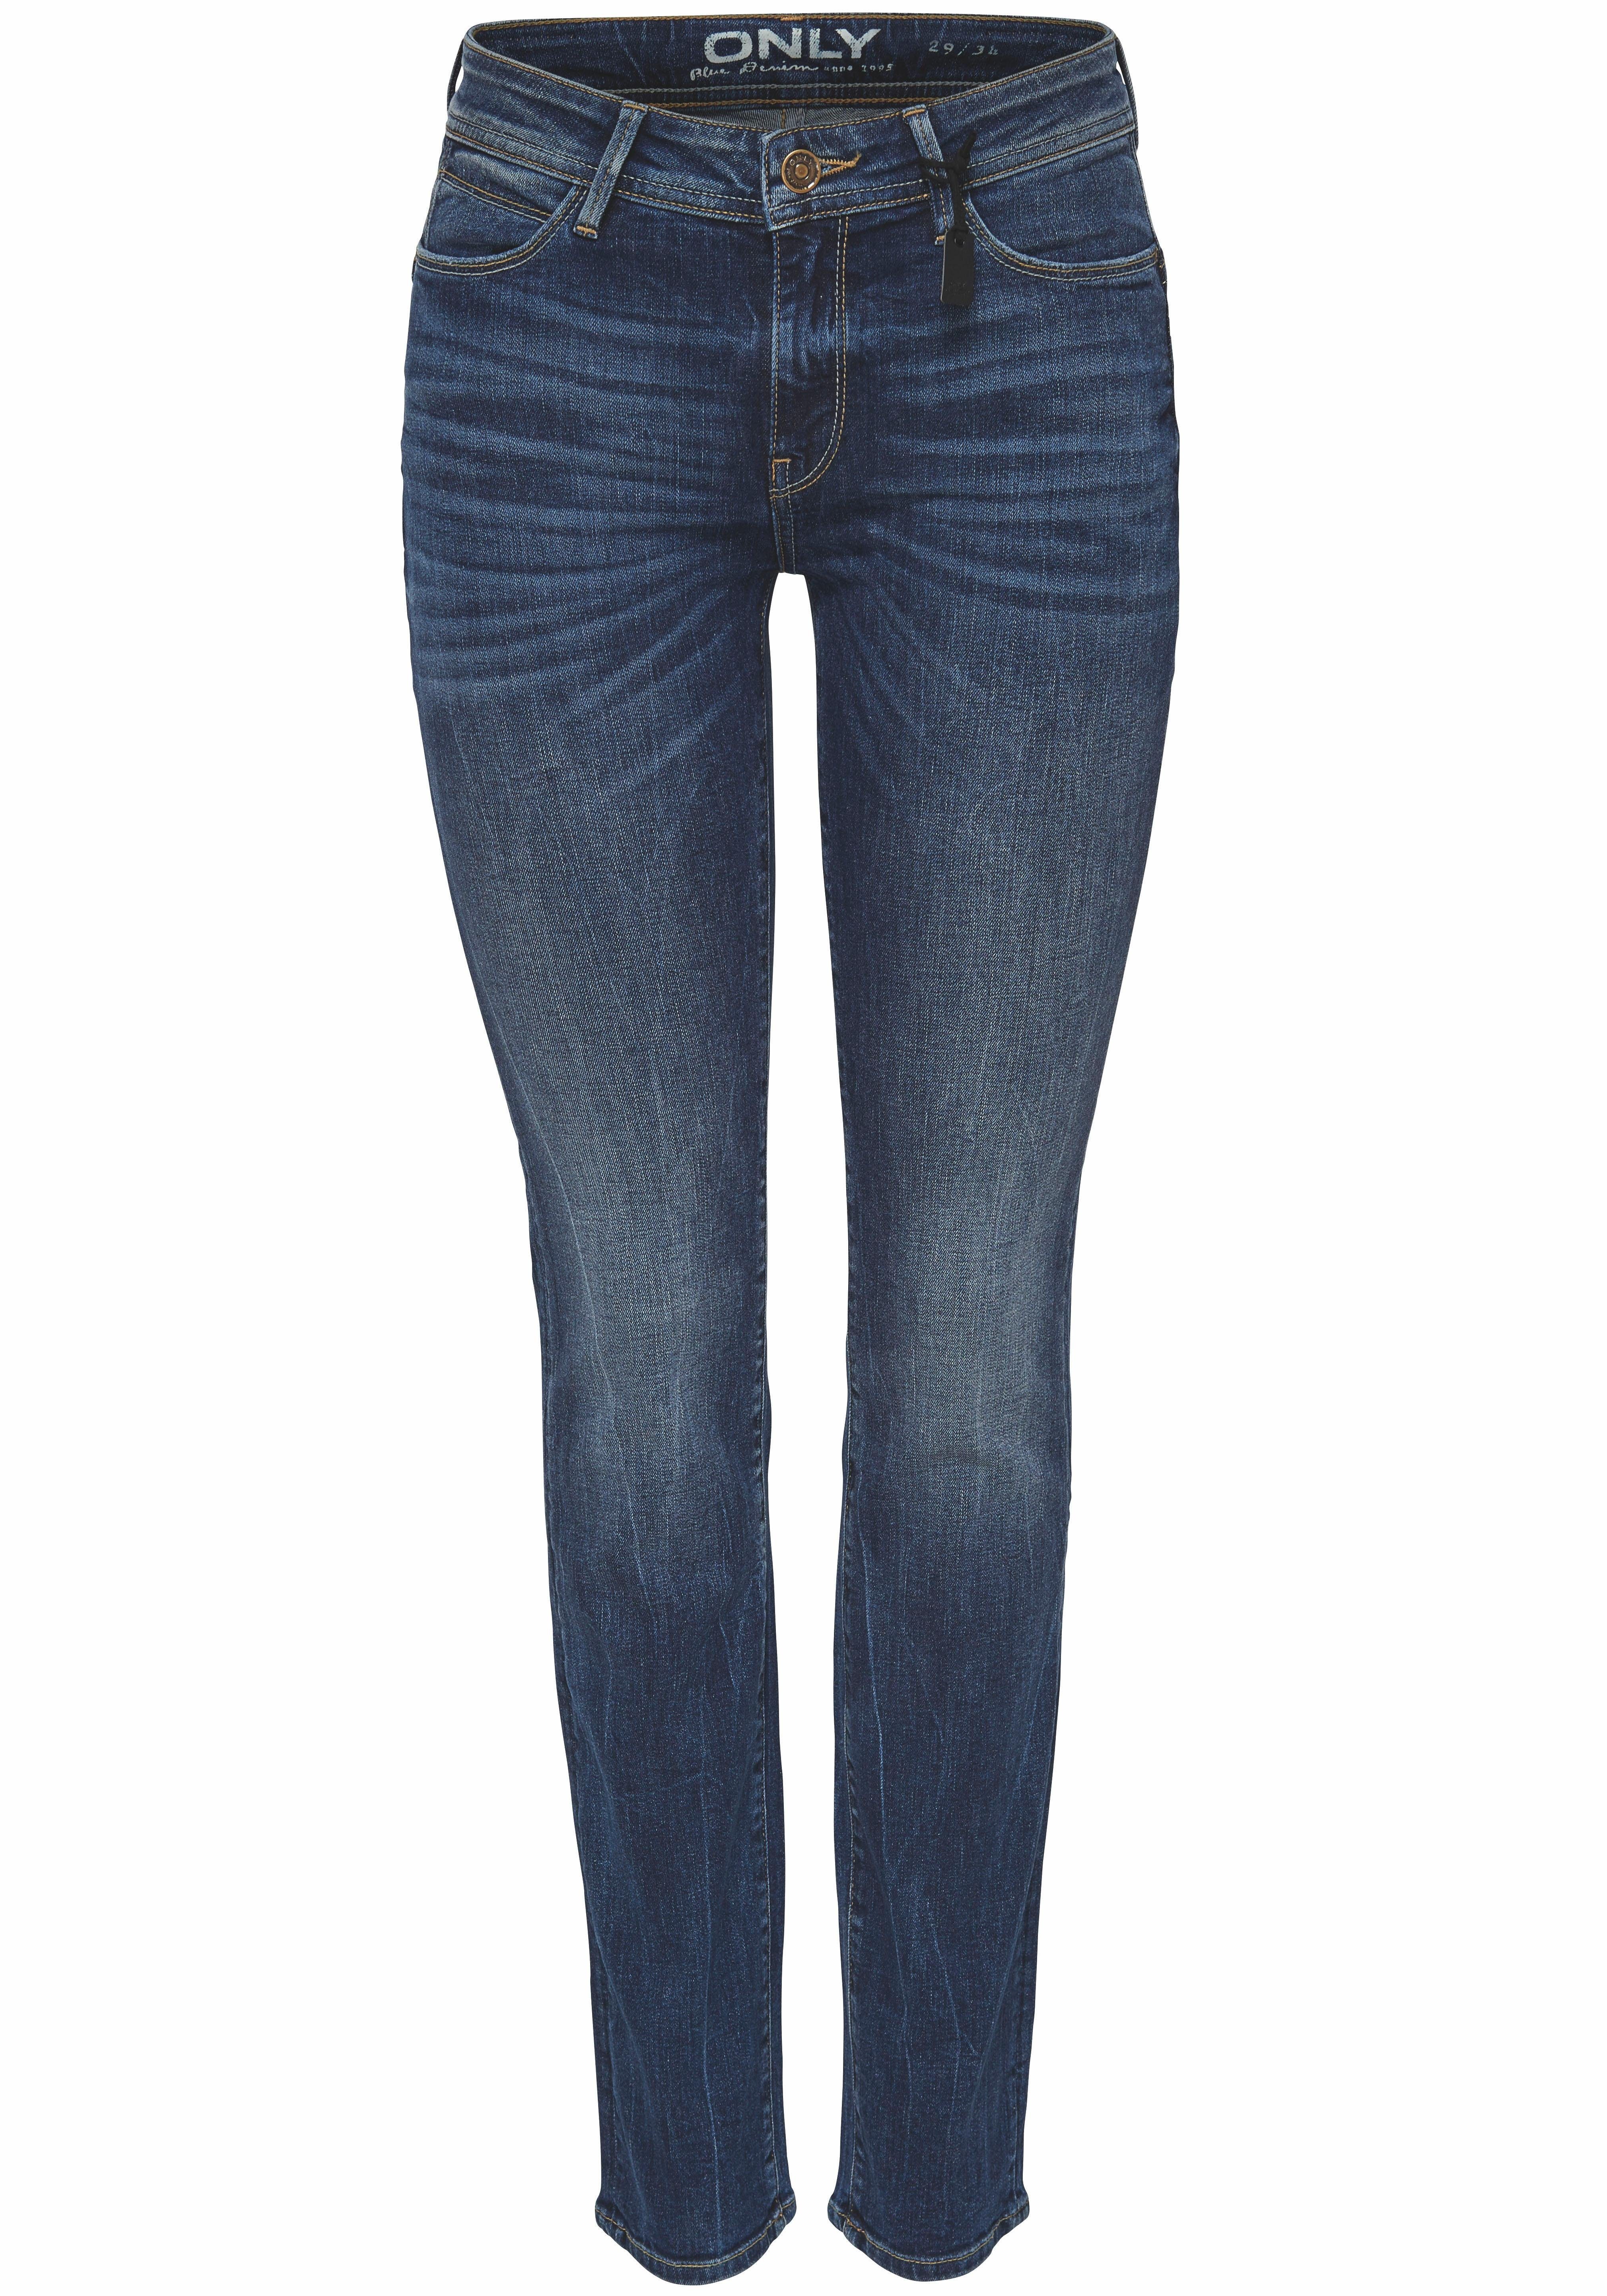 Otto - Only NU 15% KORTING: Only slim fit jeans SISSE